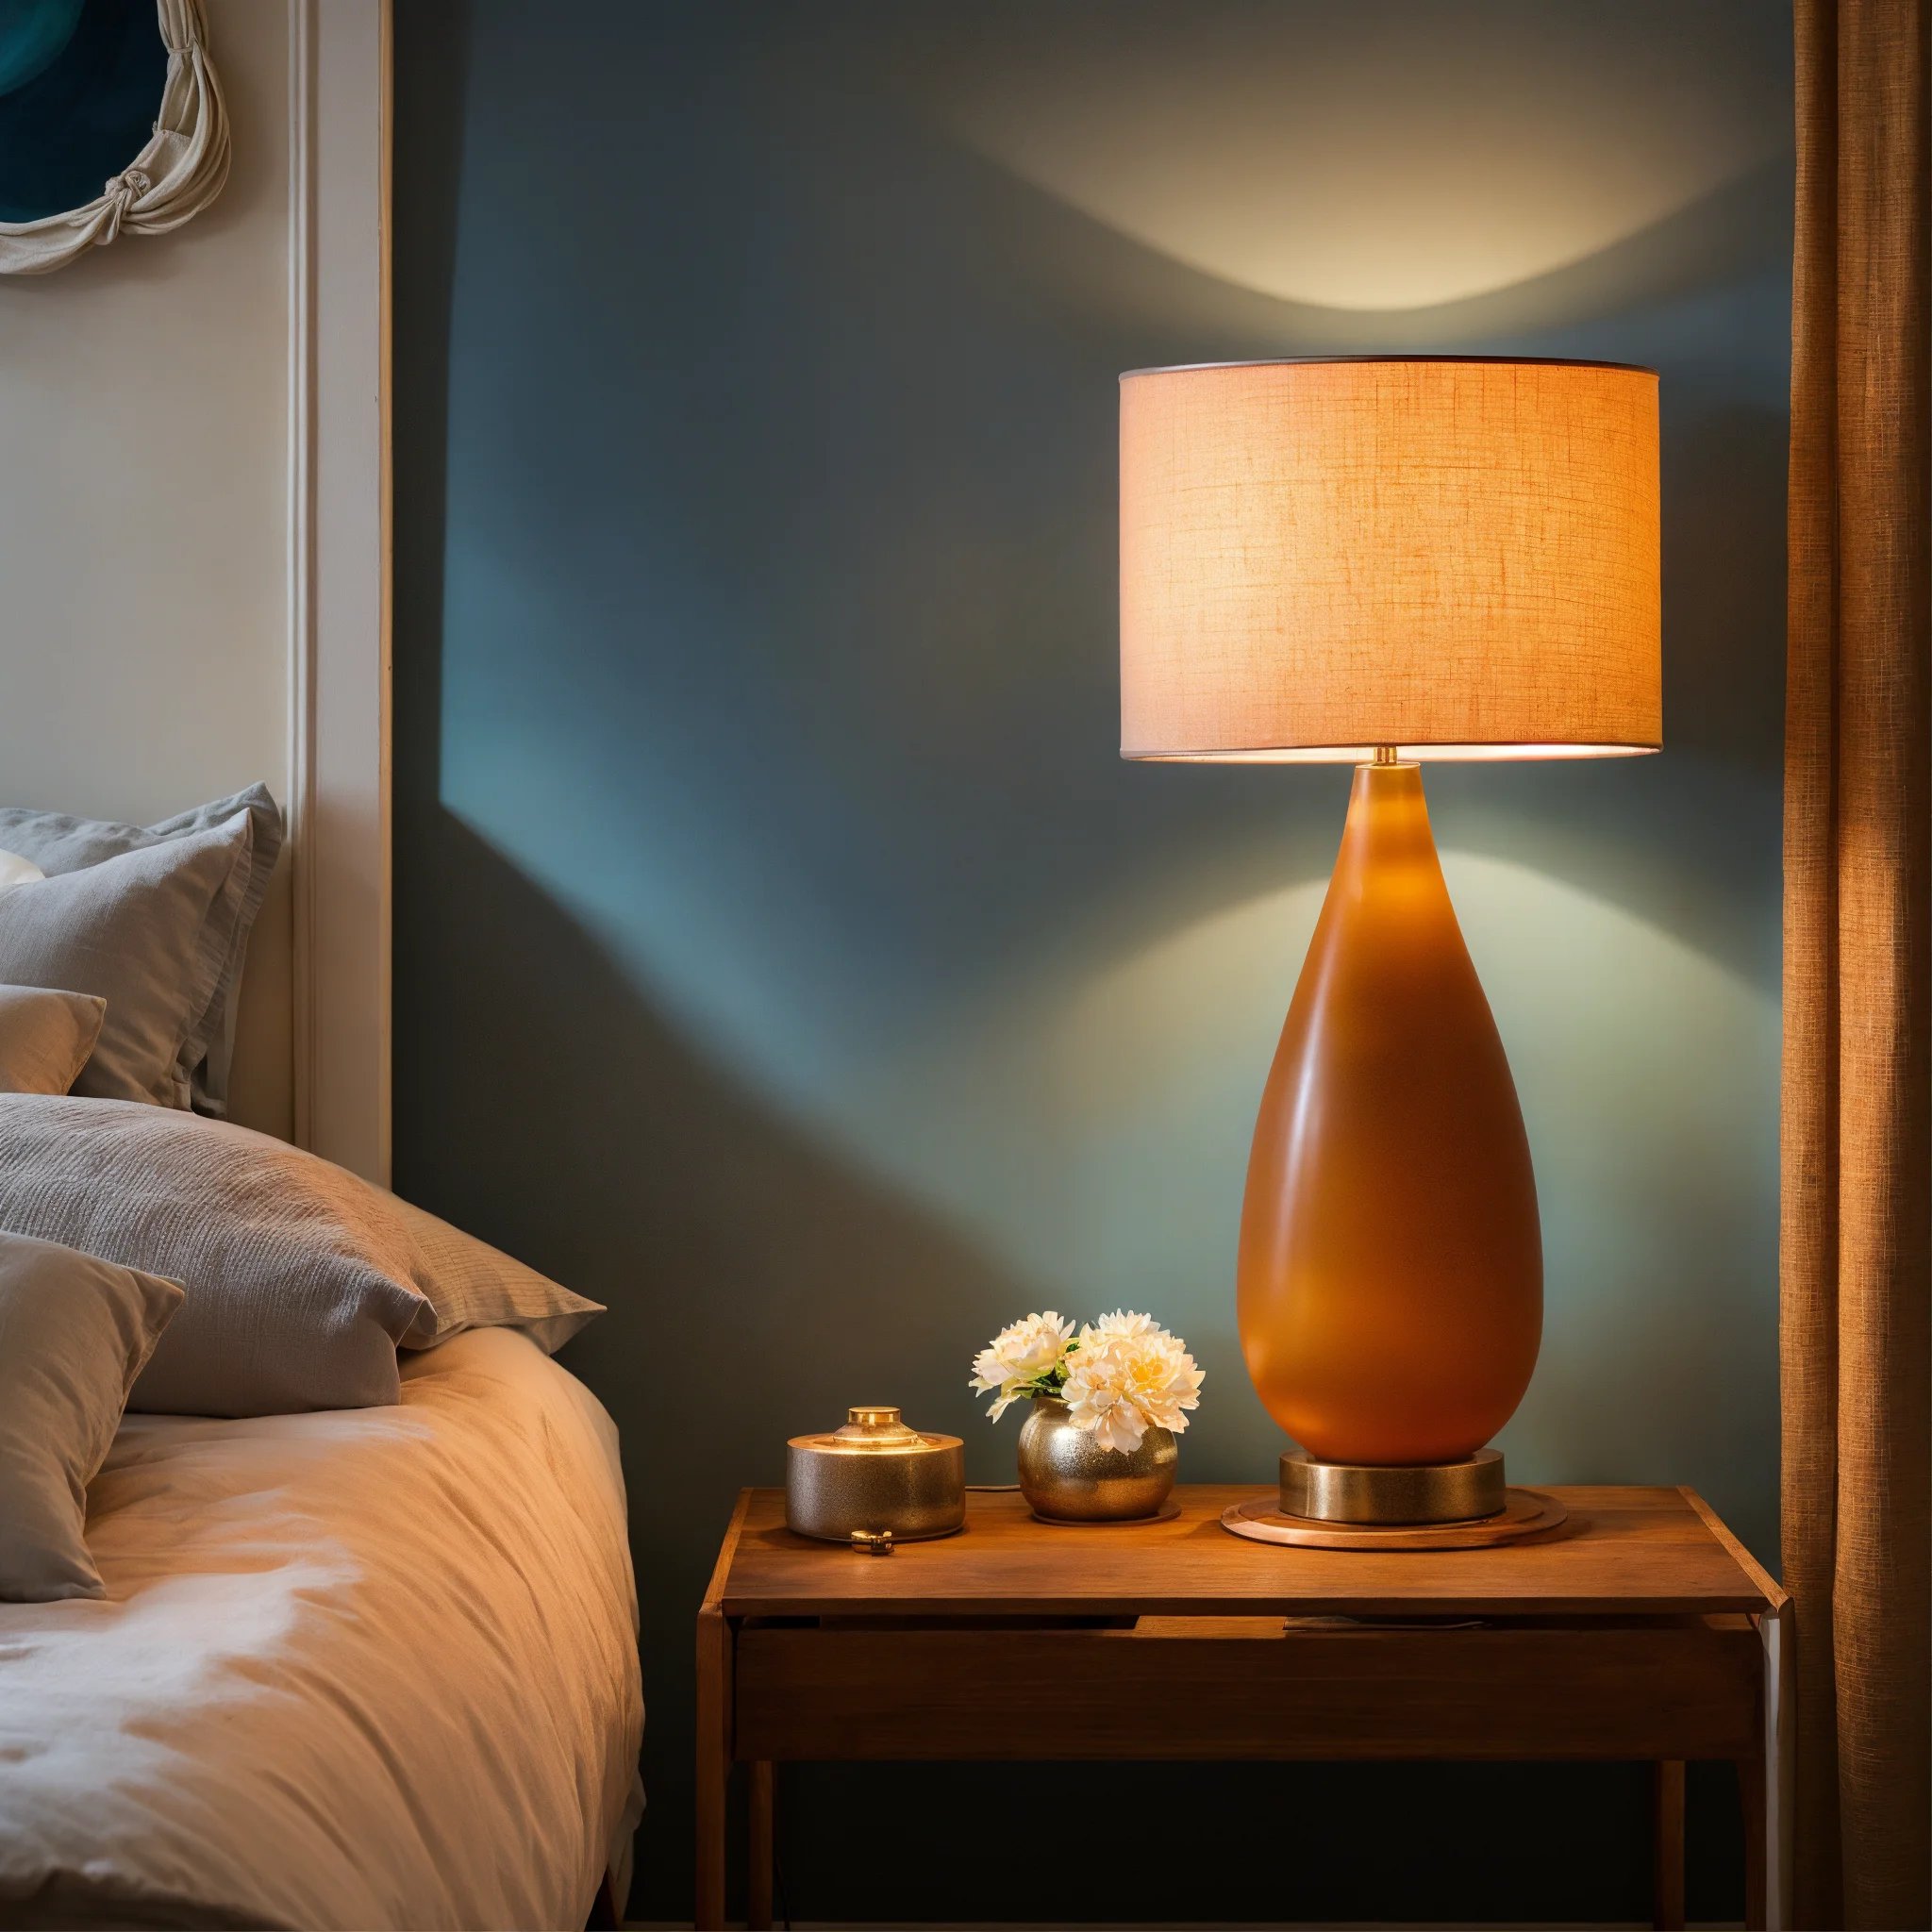 create a cozy and calm atmosphere in your bedroom